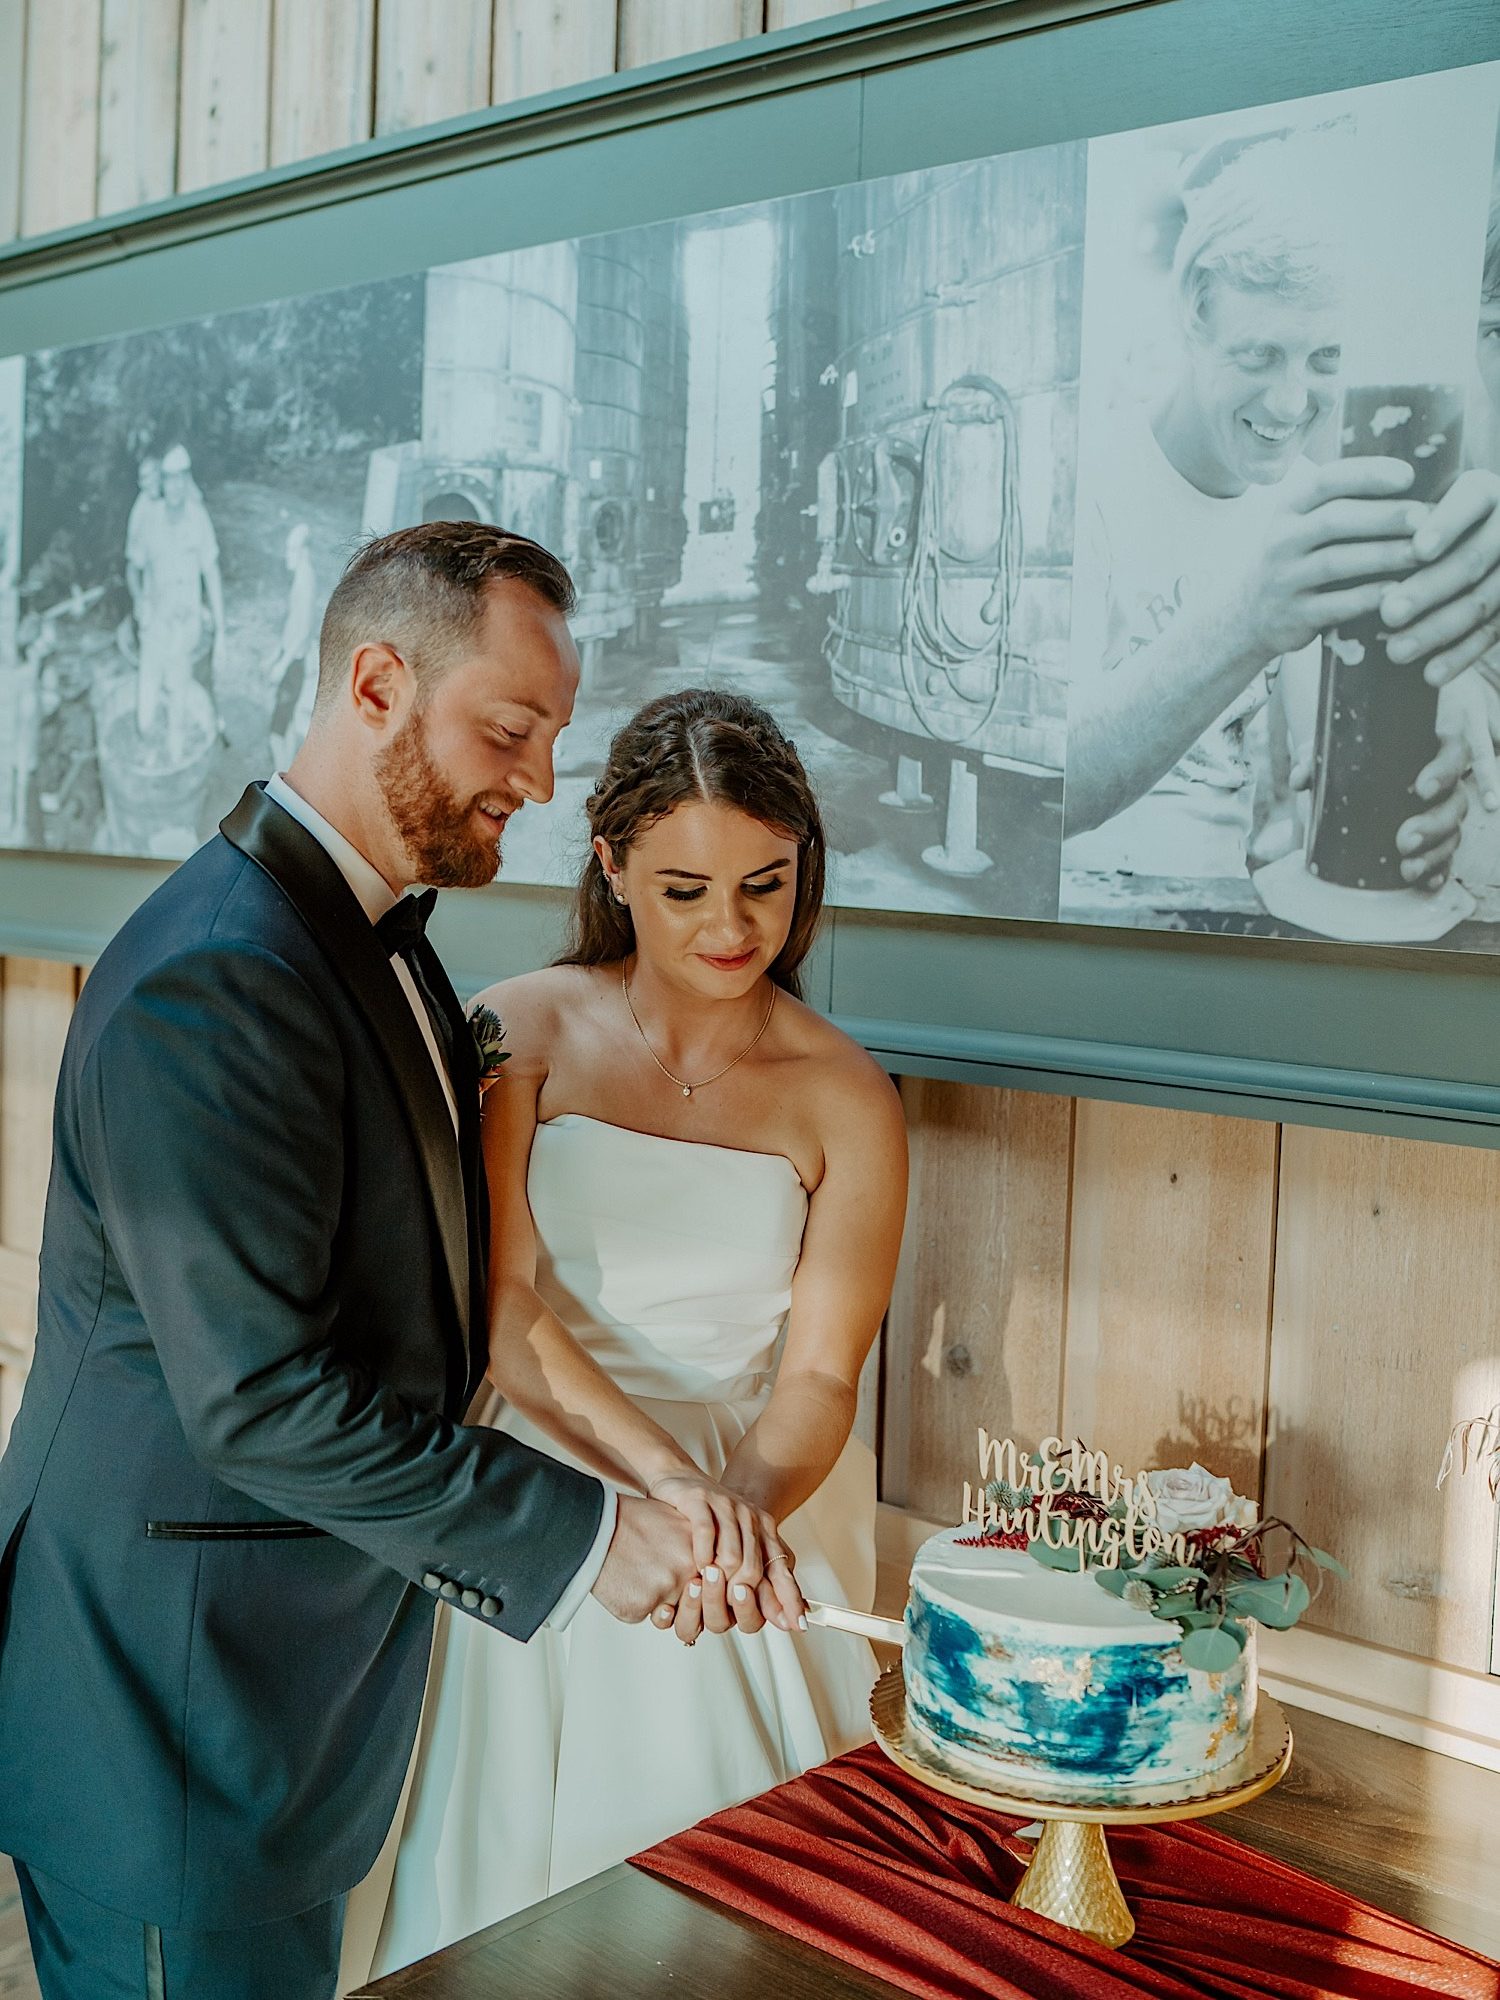 Bride and groom cut the first piece of their wedding cake together